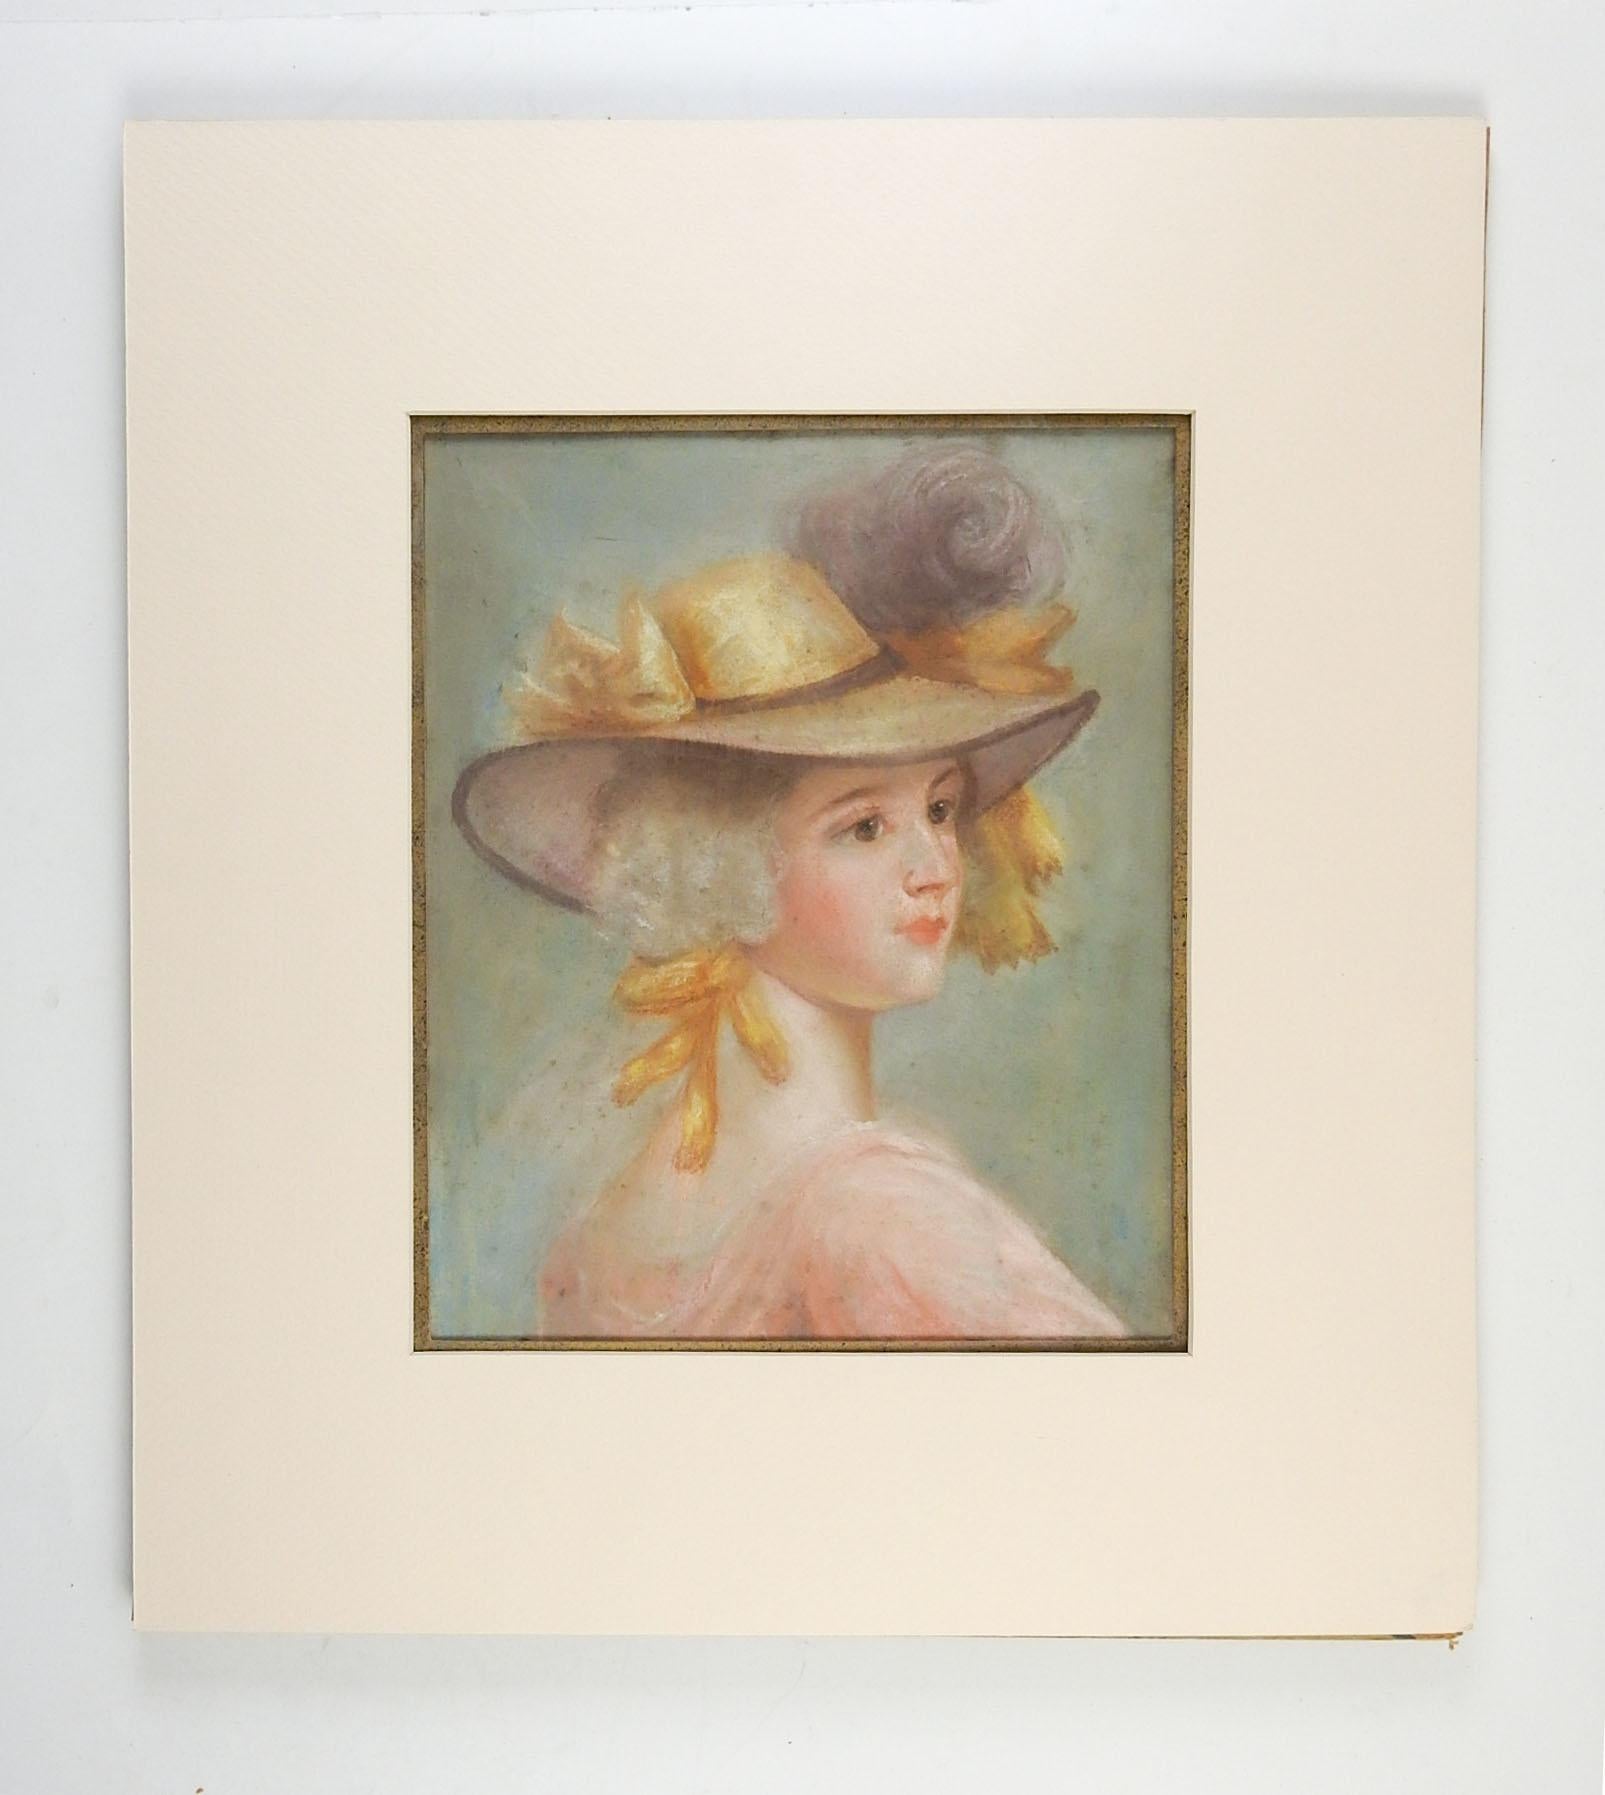 Pastel portrait on paper of woman in Georgian era pale pink dress and bonnet with yellow ribbons. Unsigned, circa 1930's. Unframed, displayed mounted on board under mat, opening size 9L x 12H.